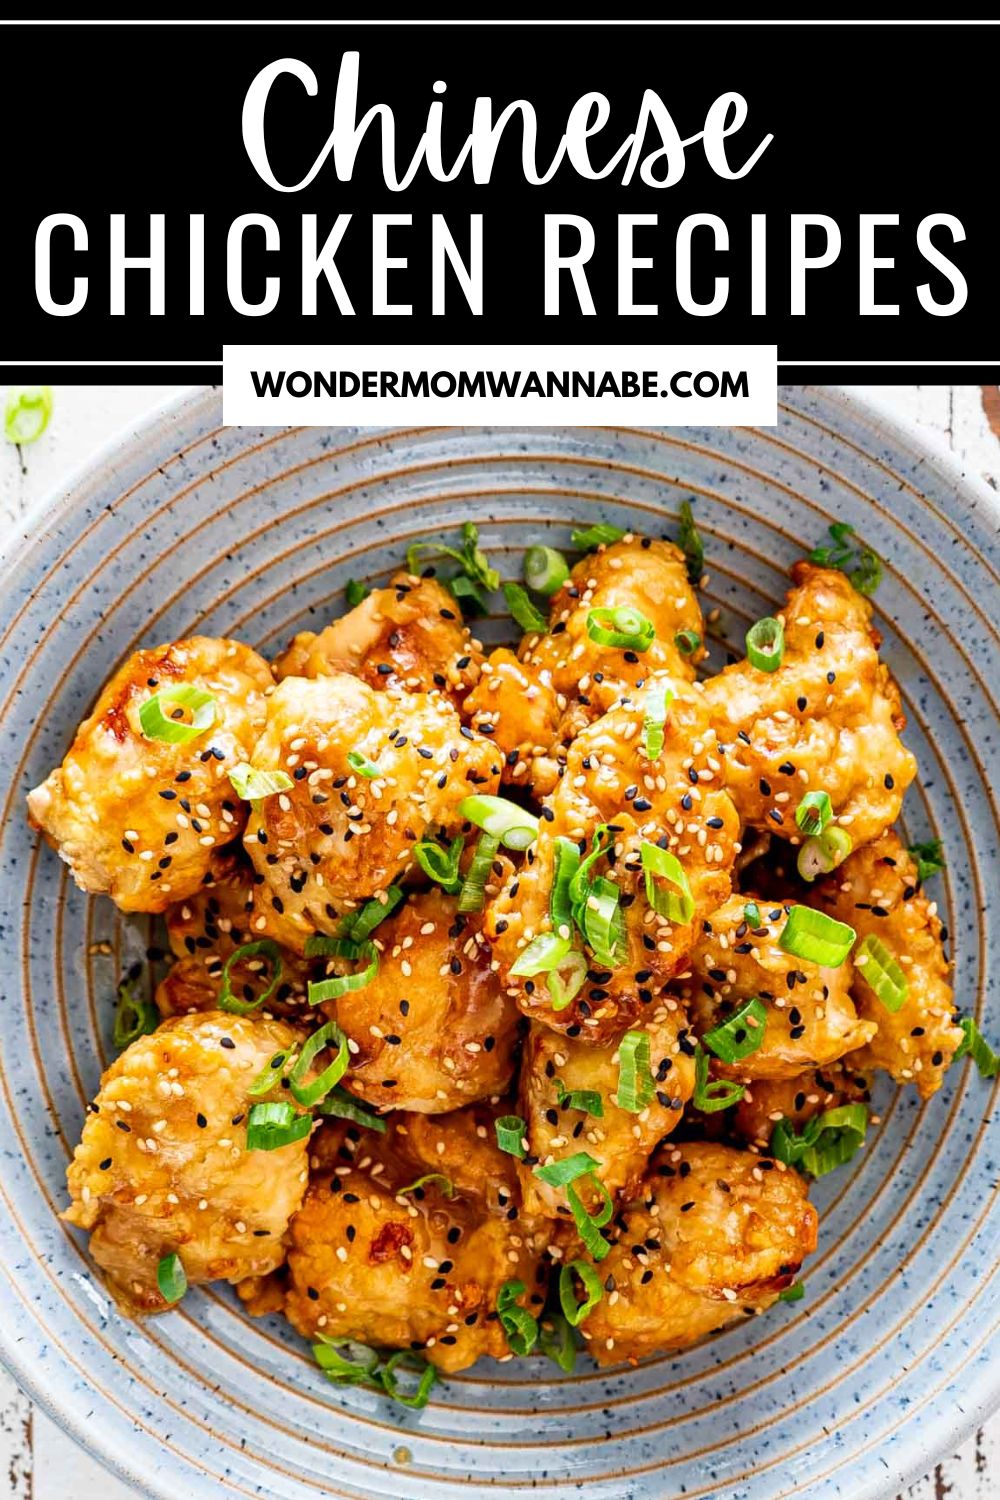 Overhead view of Chinese Lemon Chicken in a serving bowl with text title "Chinese Chicken Recipes".